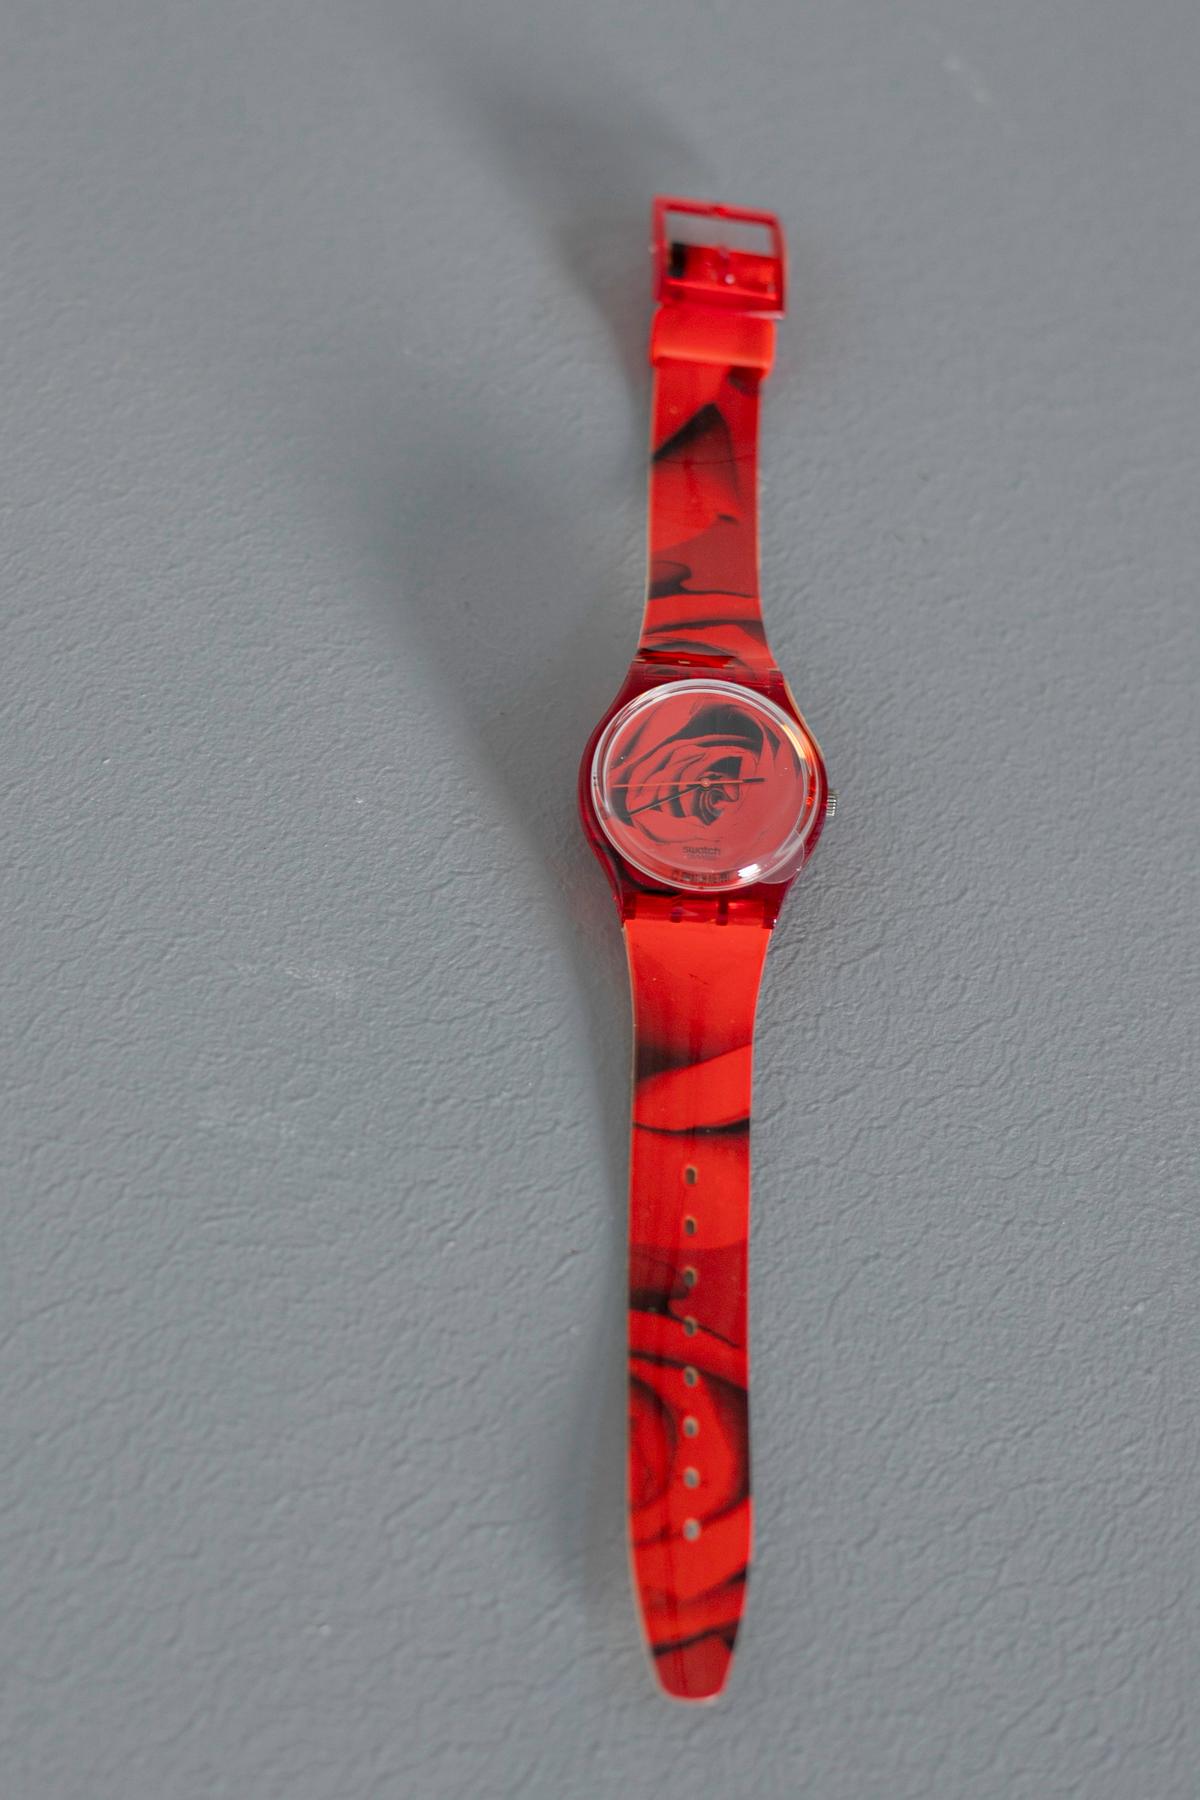 Vintage Swatch collection dedicated to the most important person on her special day, Mother's Day. All along the belt there are beautiful bright red roses. The watch has a sophisticated design to be worn with any type of outfit.

Case material: